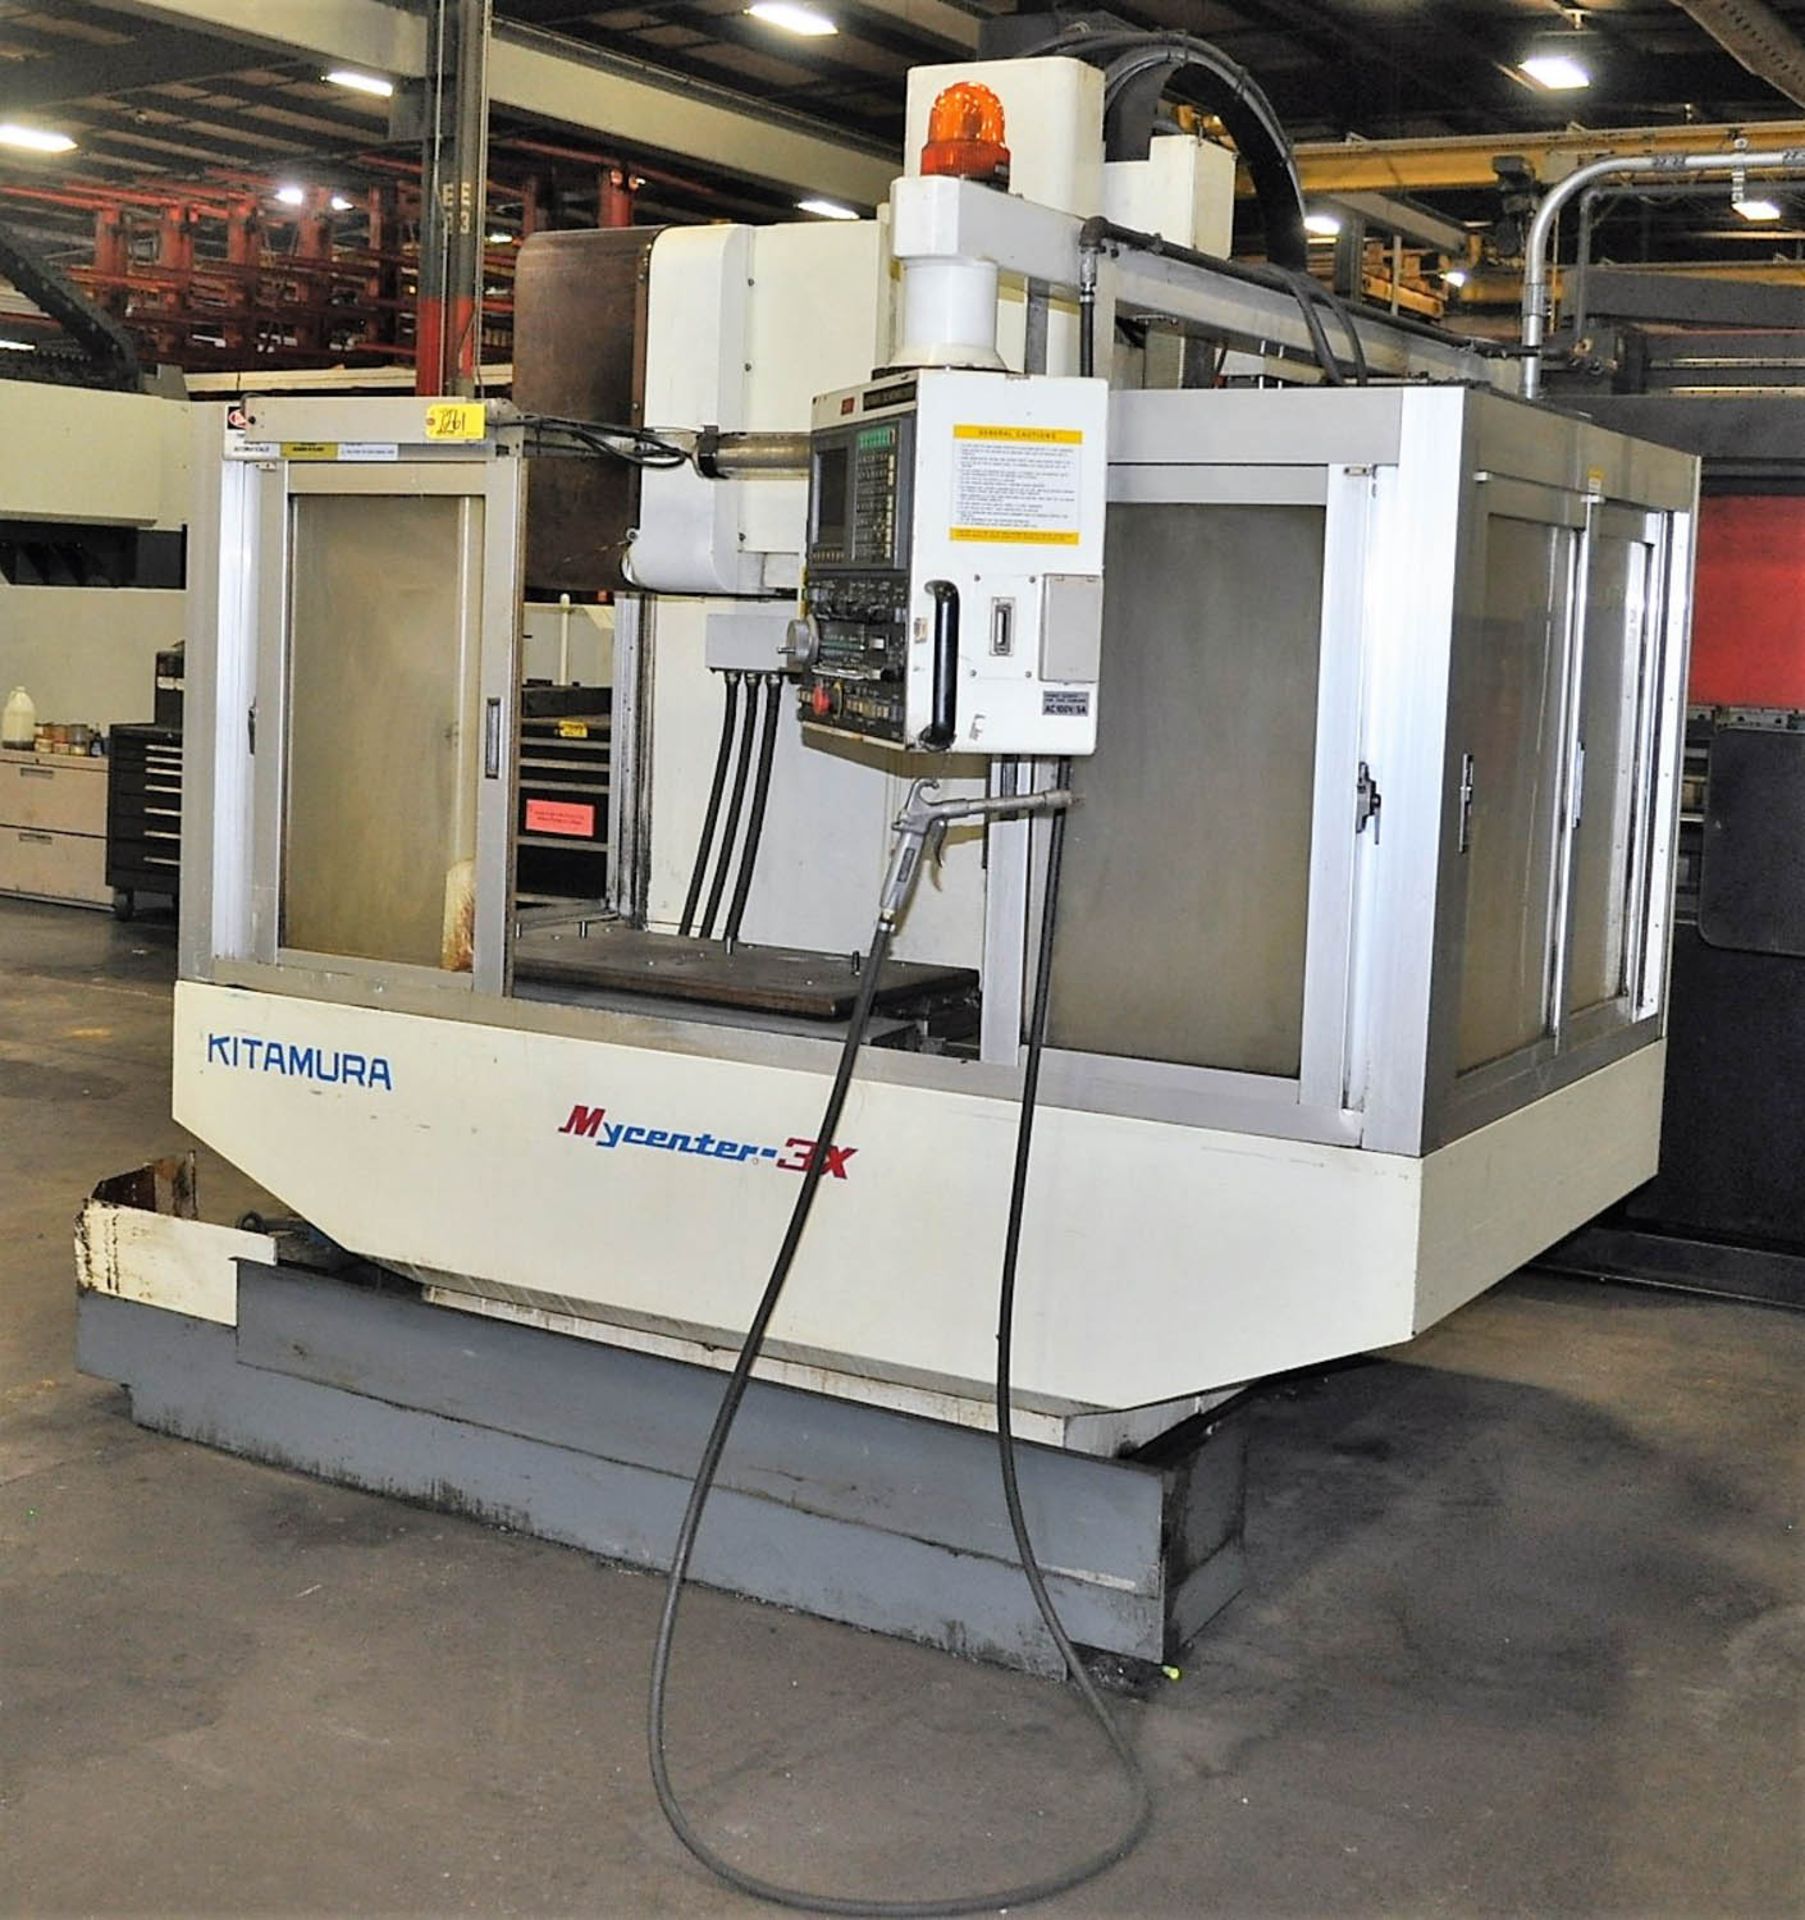 KITAMURA MYCENTER MDL. 3X CNC VERTICAL MACHINING CENTER, WITH 10,000 RPM, 20-POSITION AUTOMATIC TOOL - Image 4 of 8